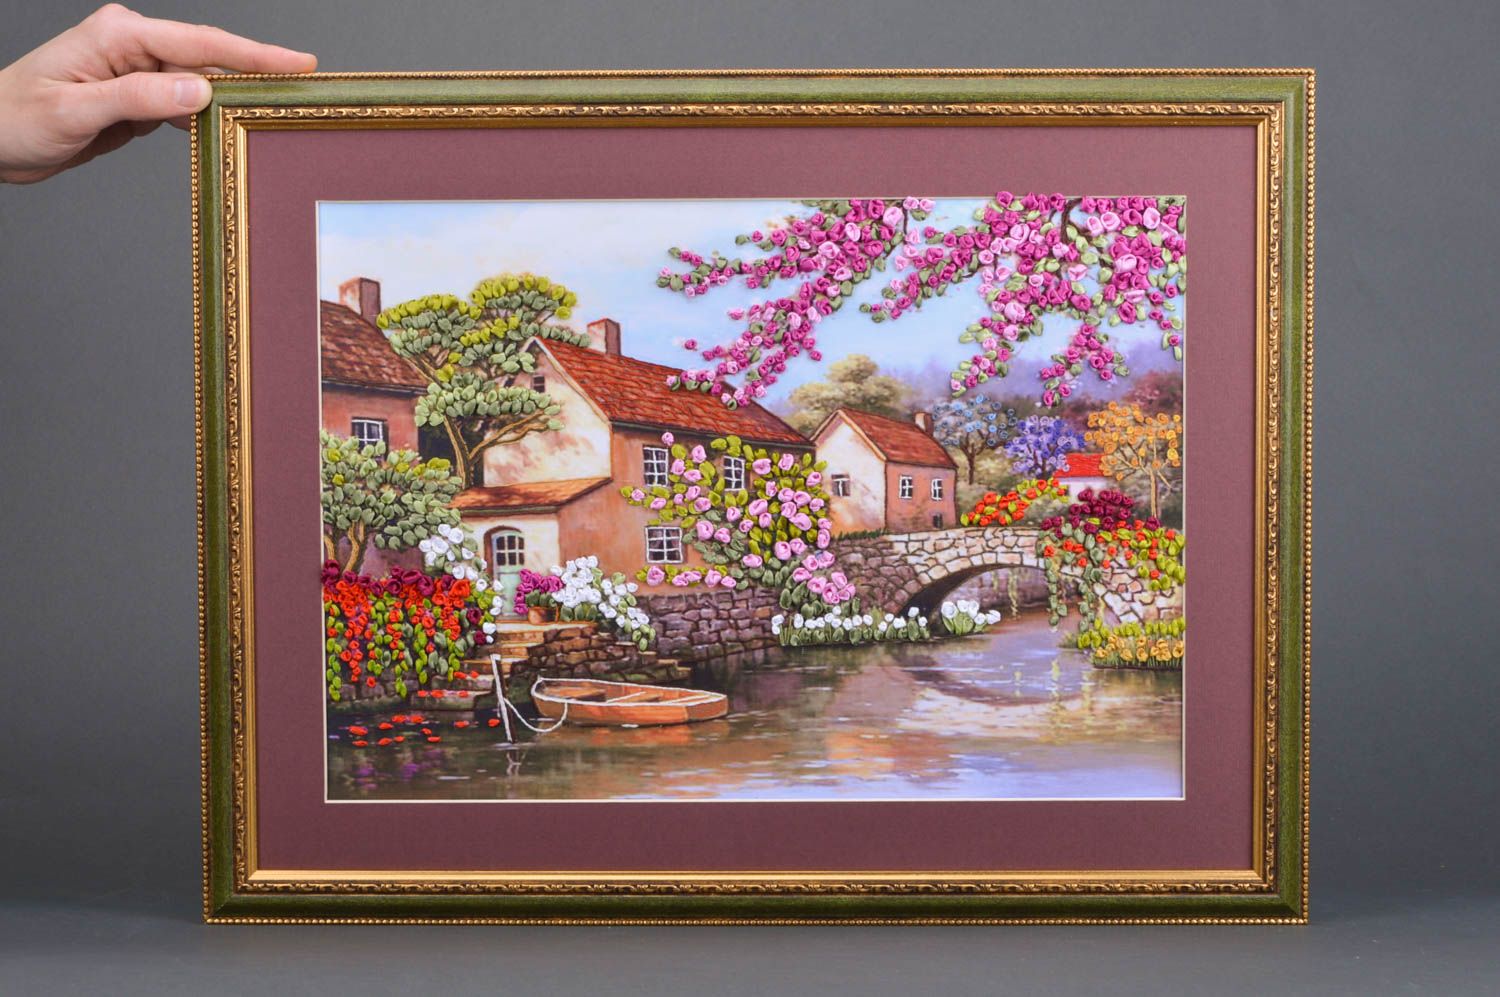 Horizontal handmade satin ribbon embroidery wall hanging in frame Landscape photo 3